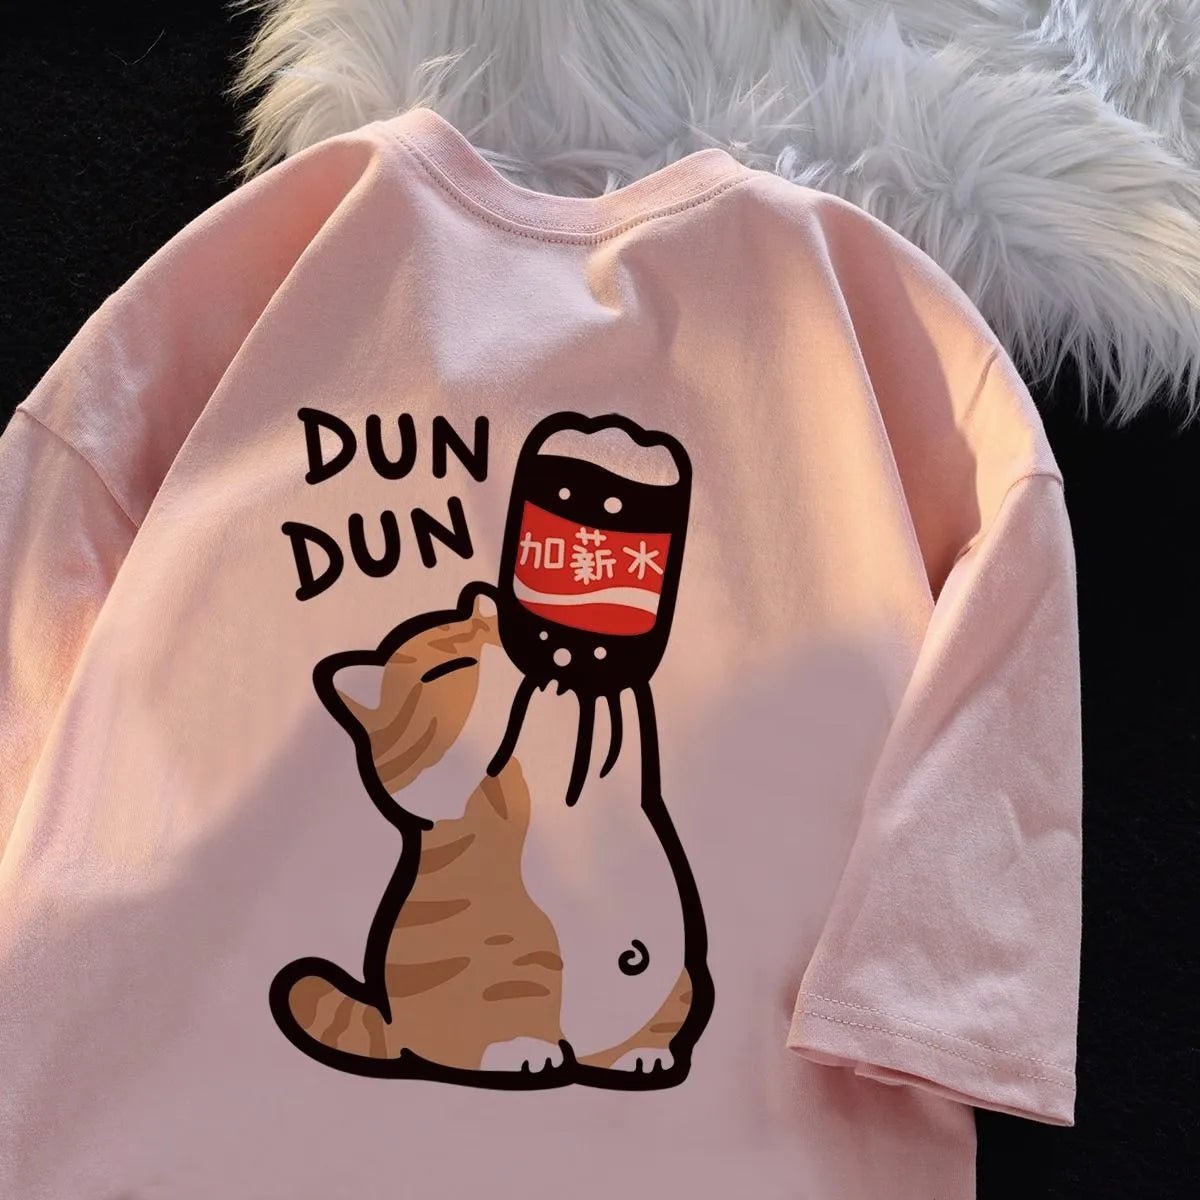 Funny and cute cat design on pink T-Shirts